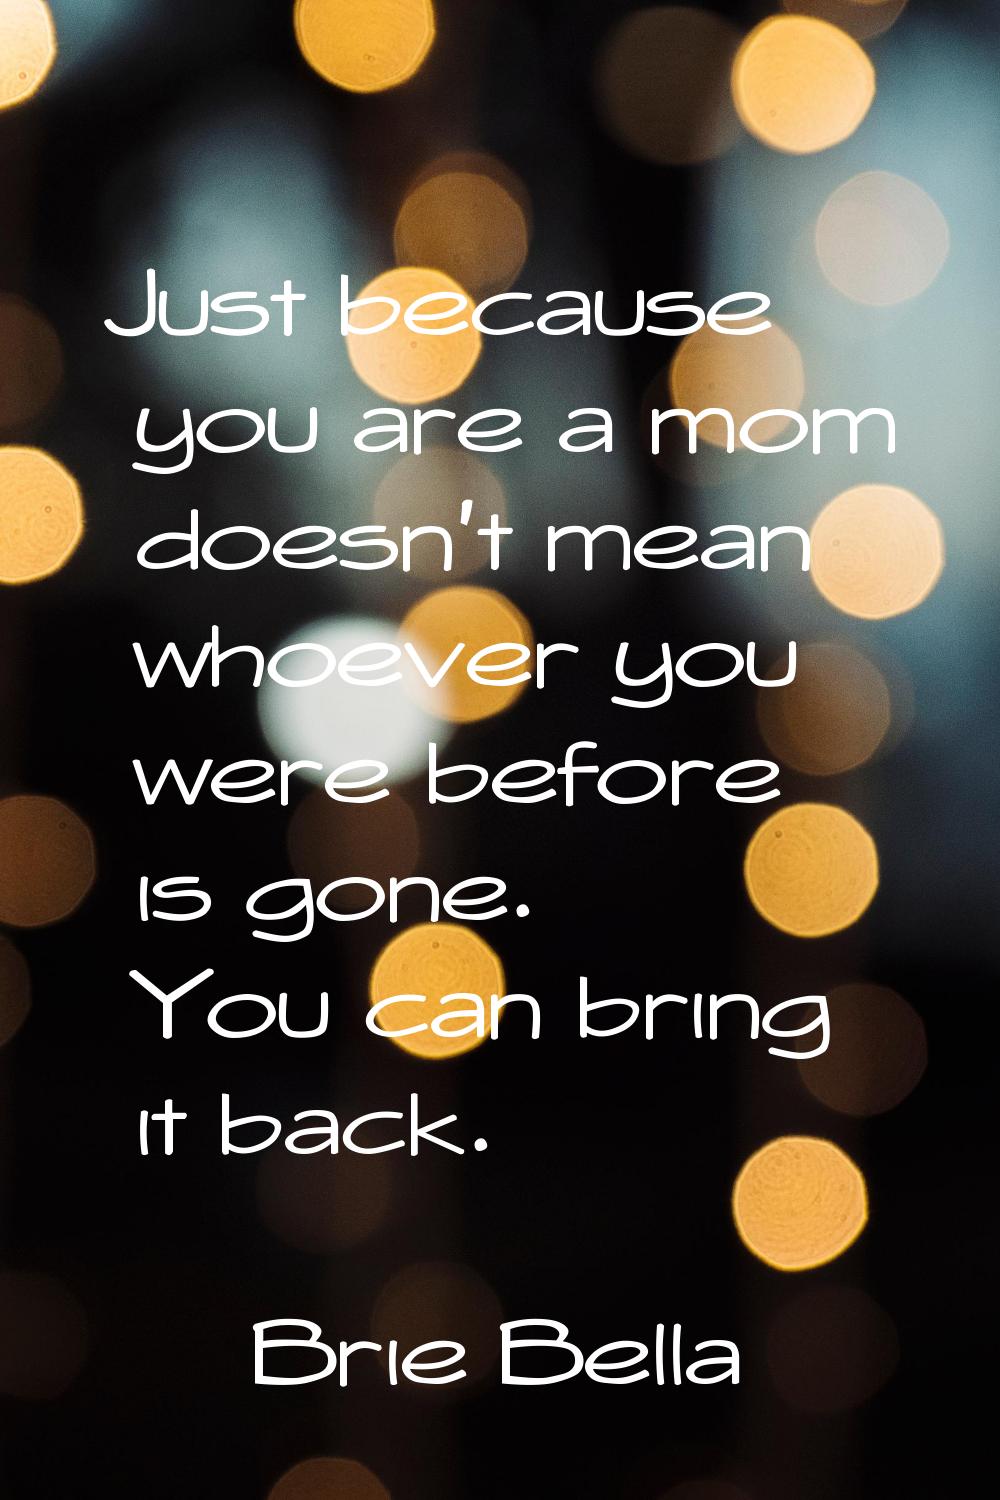 Just because you are a mom doesn't mean whoever you were before is gone. You can bring it back.